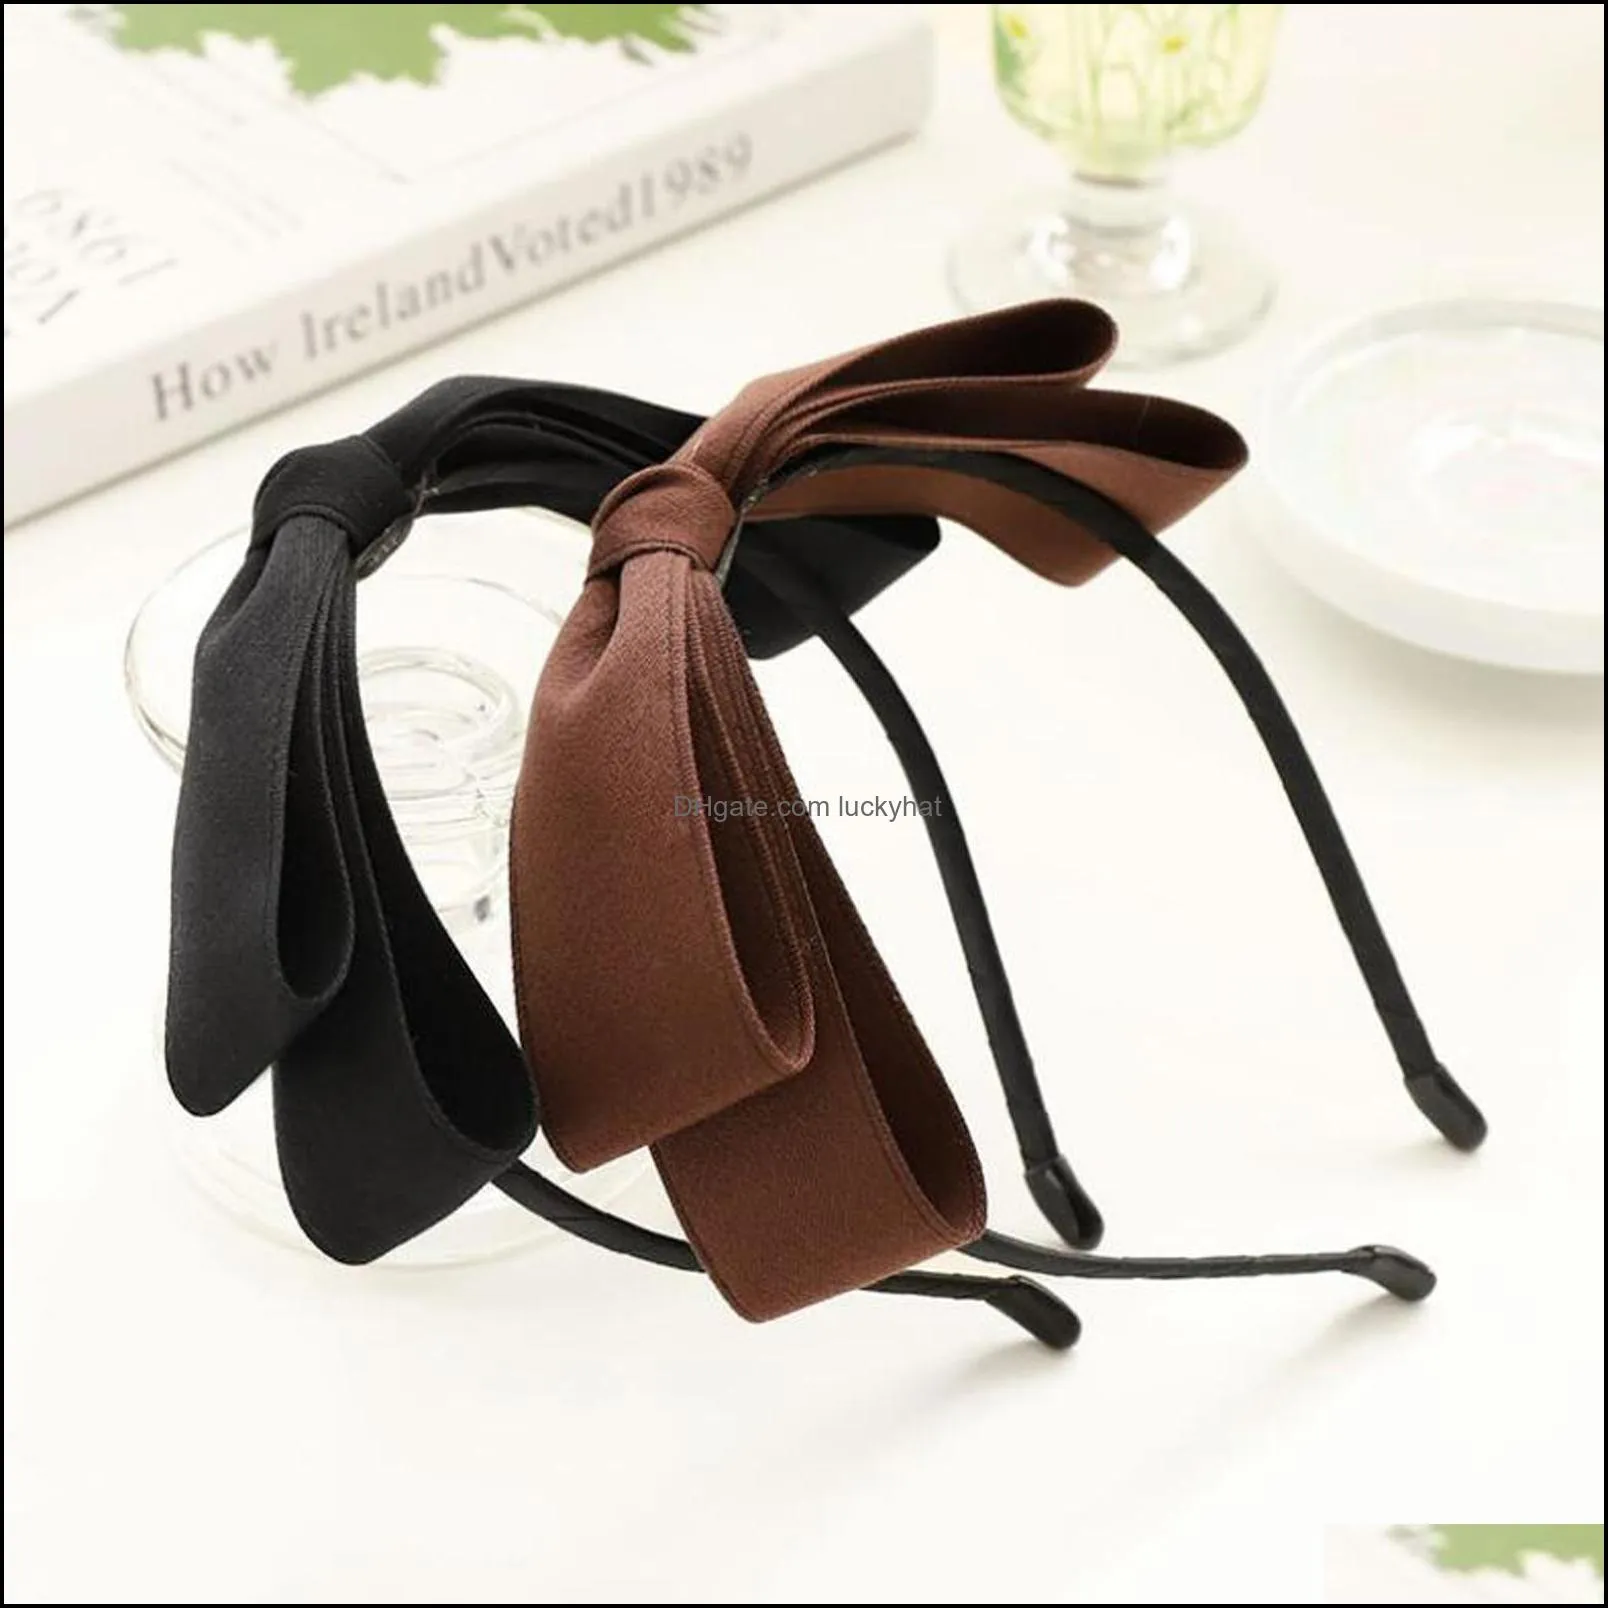 New Vintage Headband For Women Big Bowknot Simple Classic Hairband Solid Color Casual Headwear Adult Hair Accessories